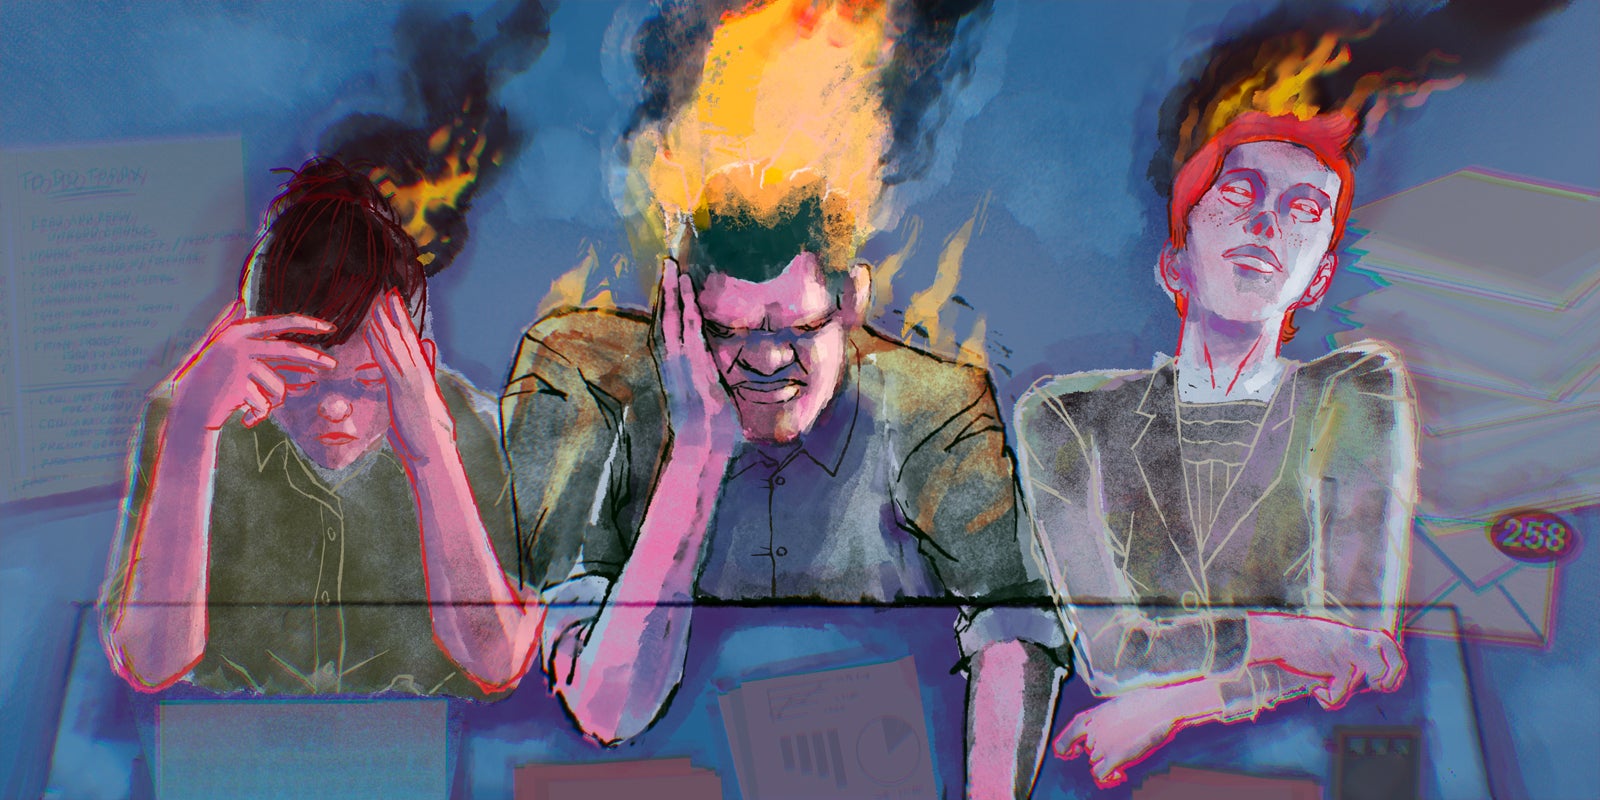 Three people, slumped over, with flames emerging from their heads, who are visibly affected by the effects of burnout culture. 